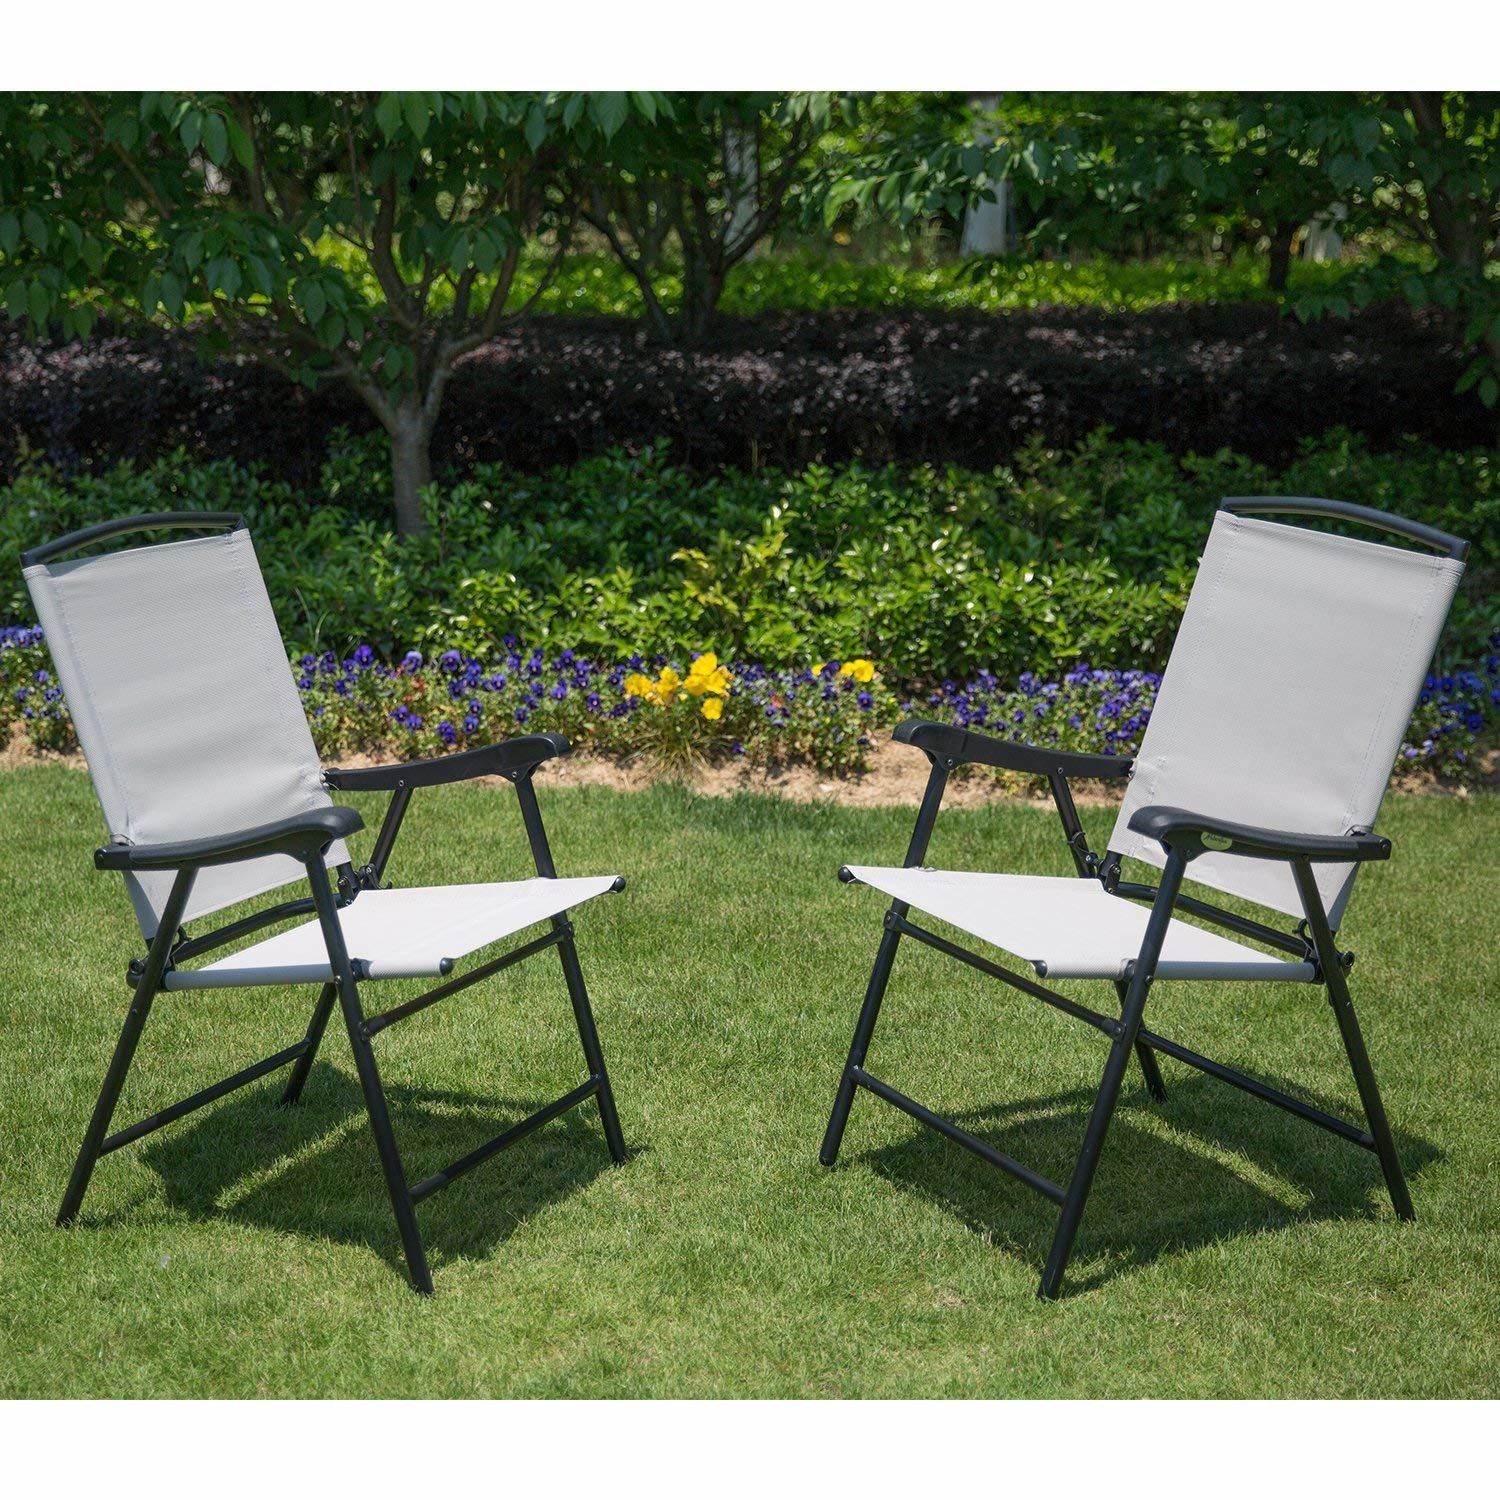 Details About Folding Patio Chair Set Of 2 Lawn Deck Chairs Metal Beige Fabric 300 Lb Capacity intended for sizing 1500 X 1500